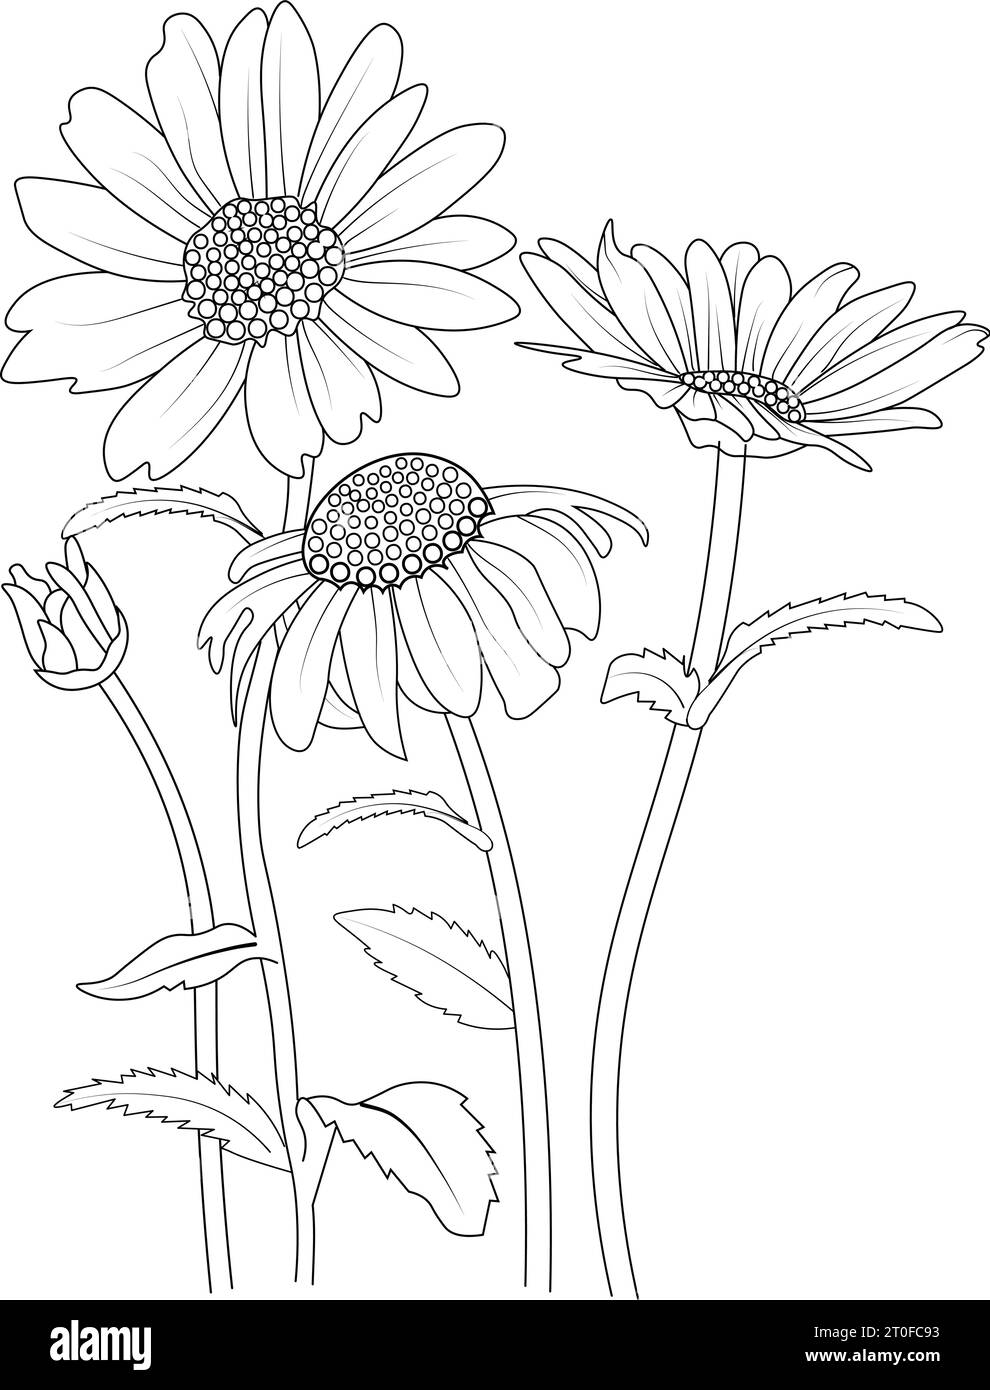 , line drawing daisy tattoo, Outline Daisy flower drawing, botanical ...